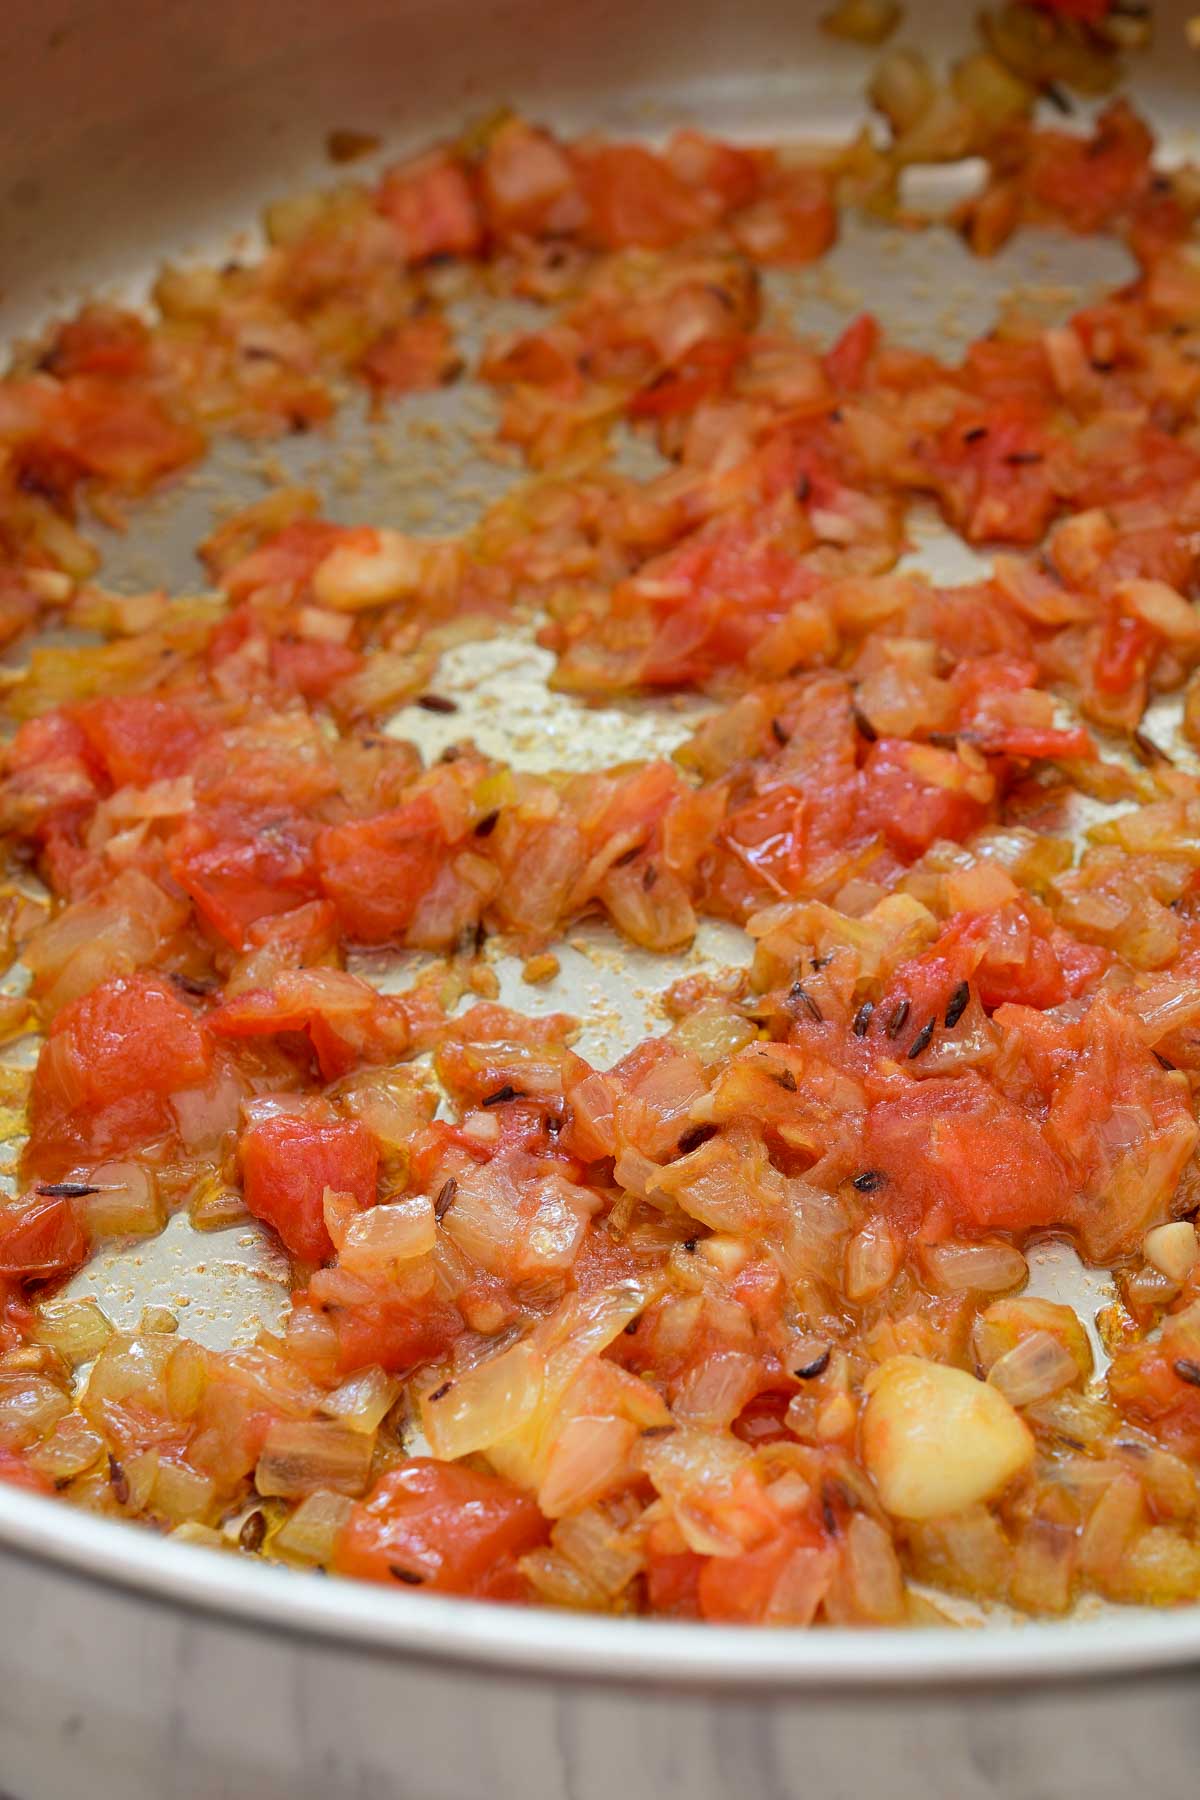 Inside the pan on fried tomatoes, onion and spices.